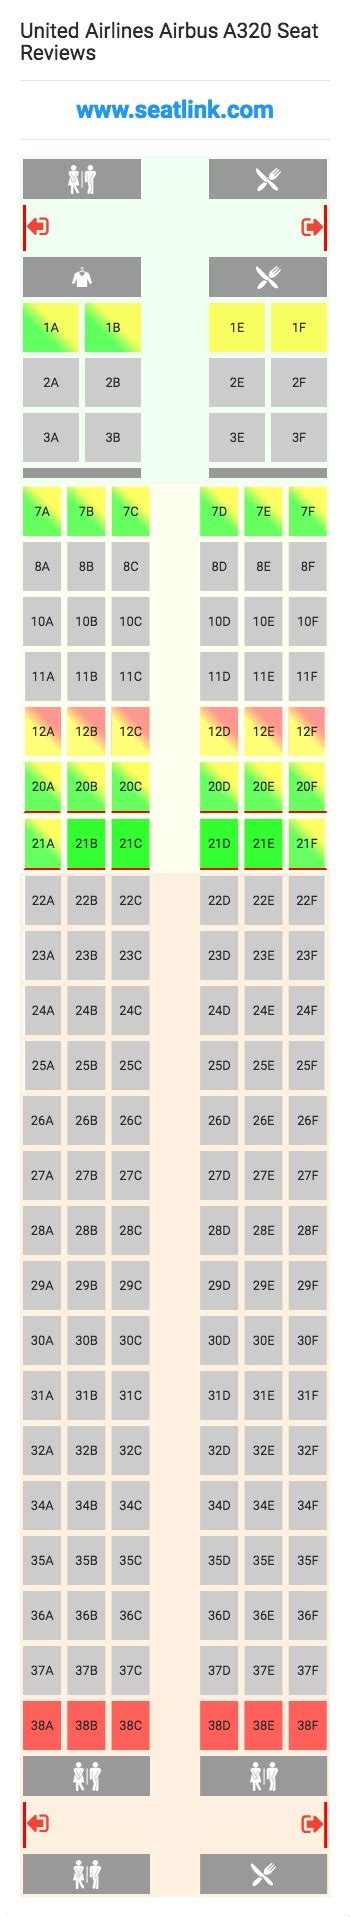 United Airlines Airbus A320 Seating Chart Updated August 2022 Seatlink